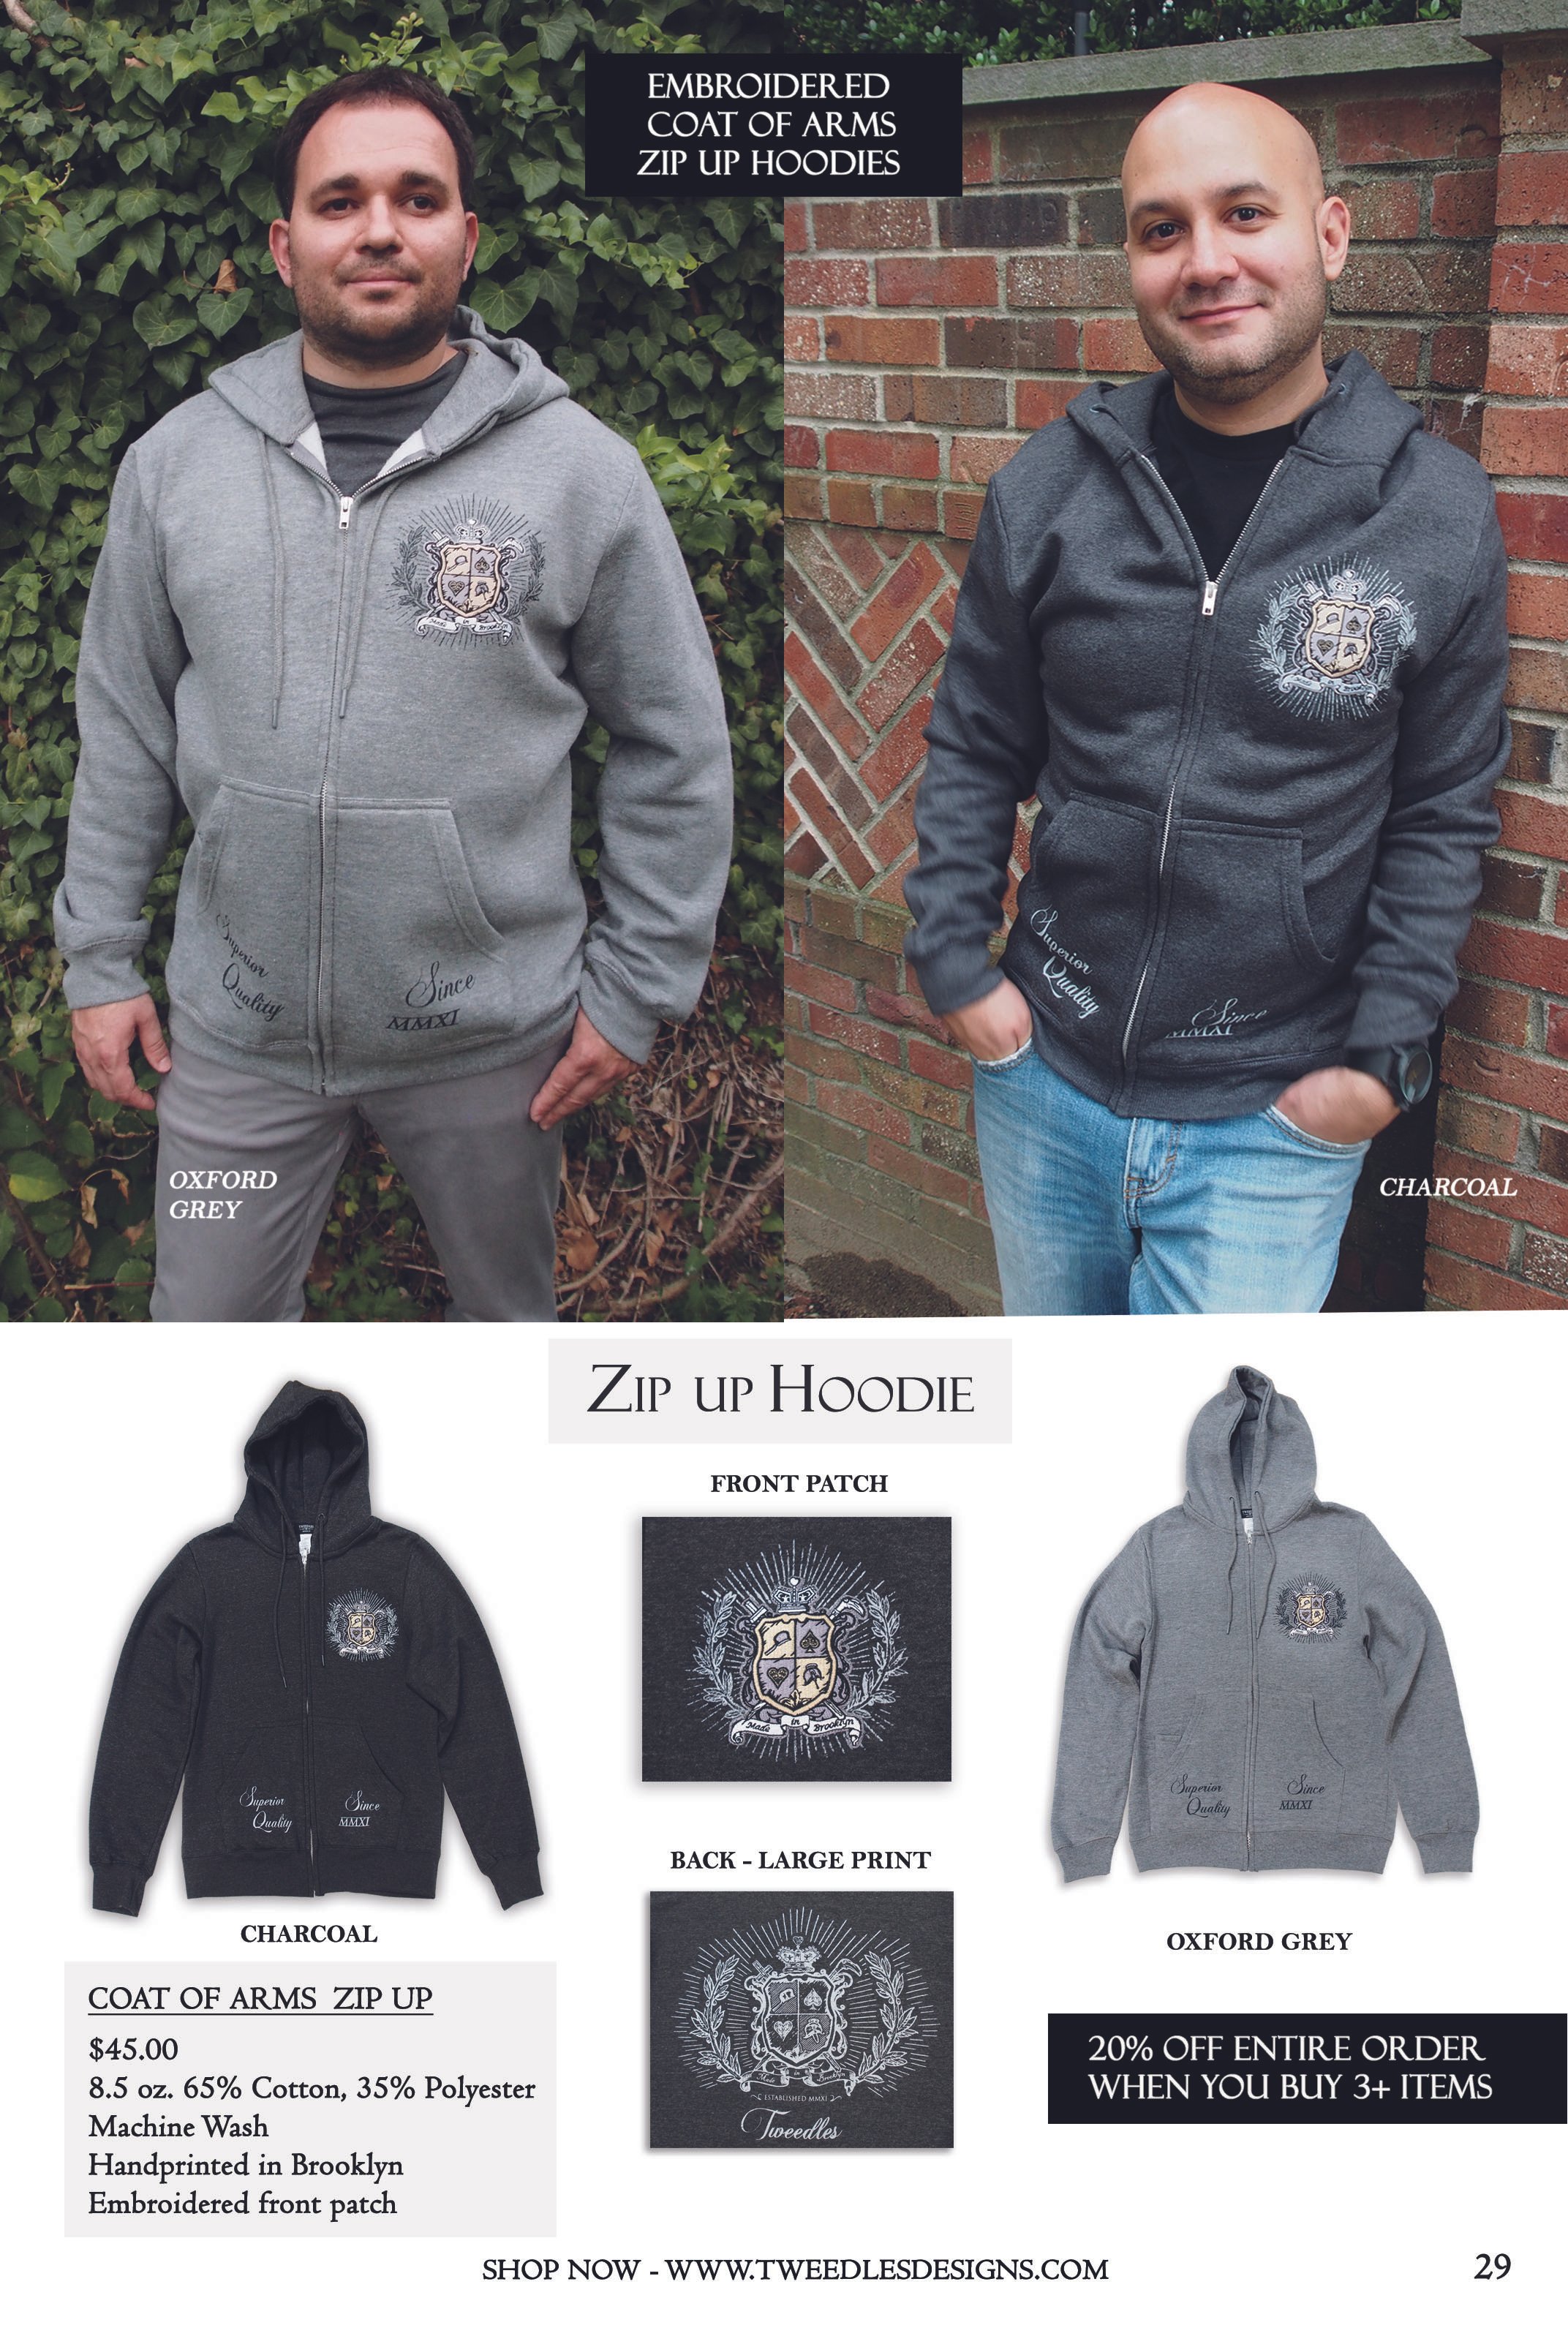 Catalog 2023 - Page 29 - (Coat of Arms Zip Up).jpg